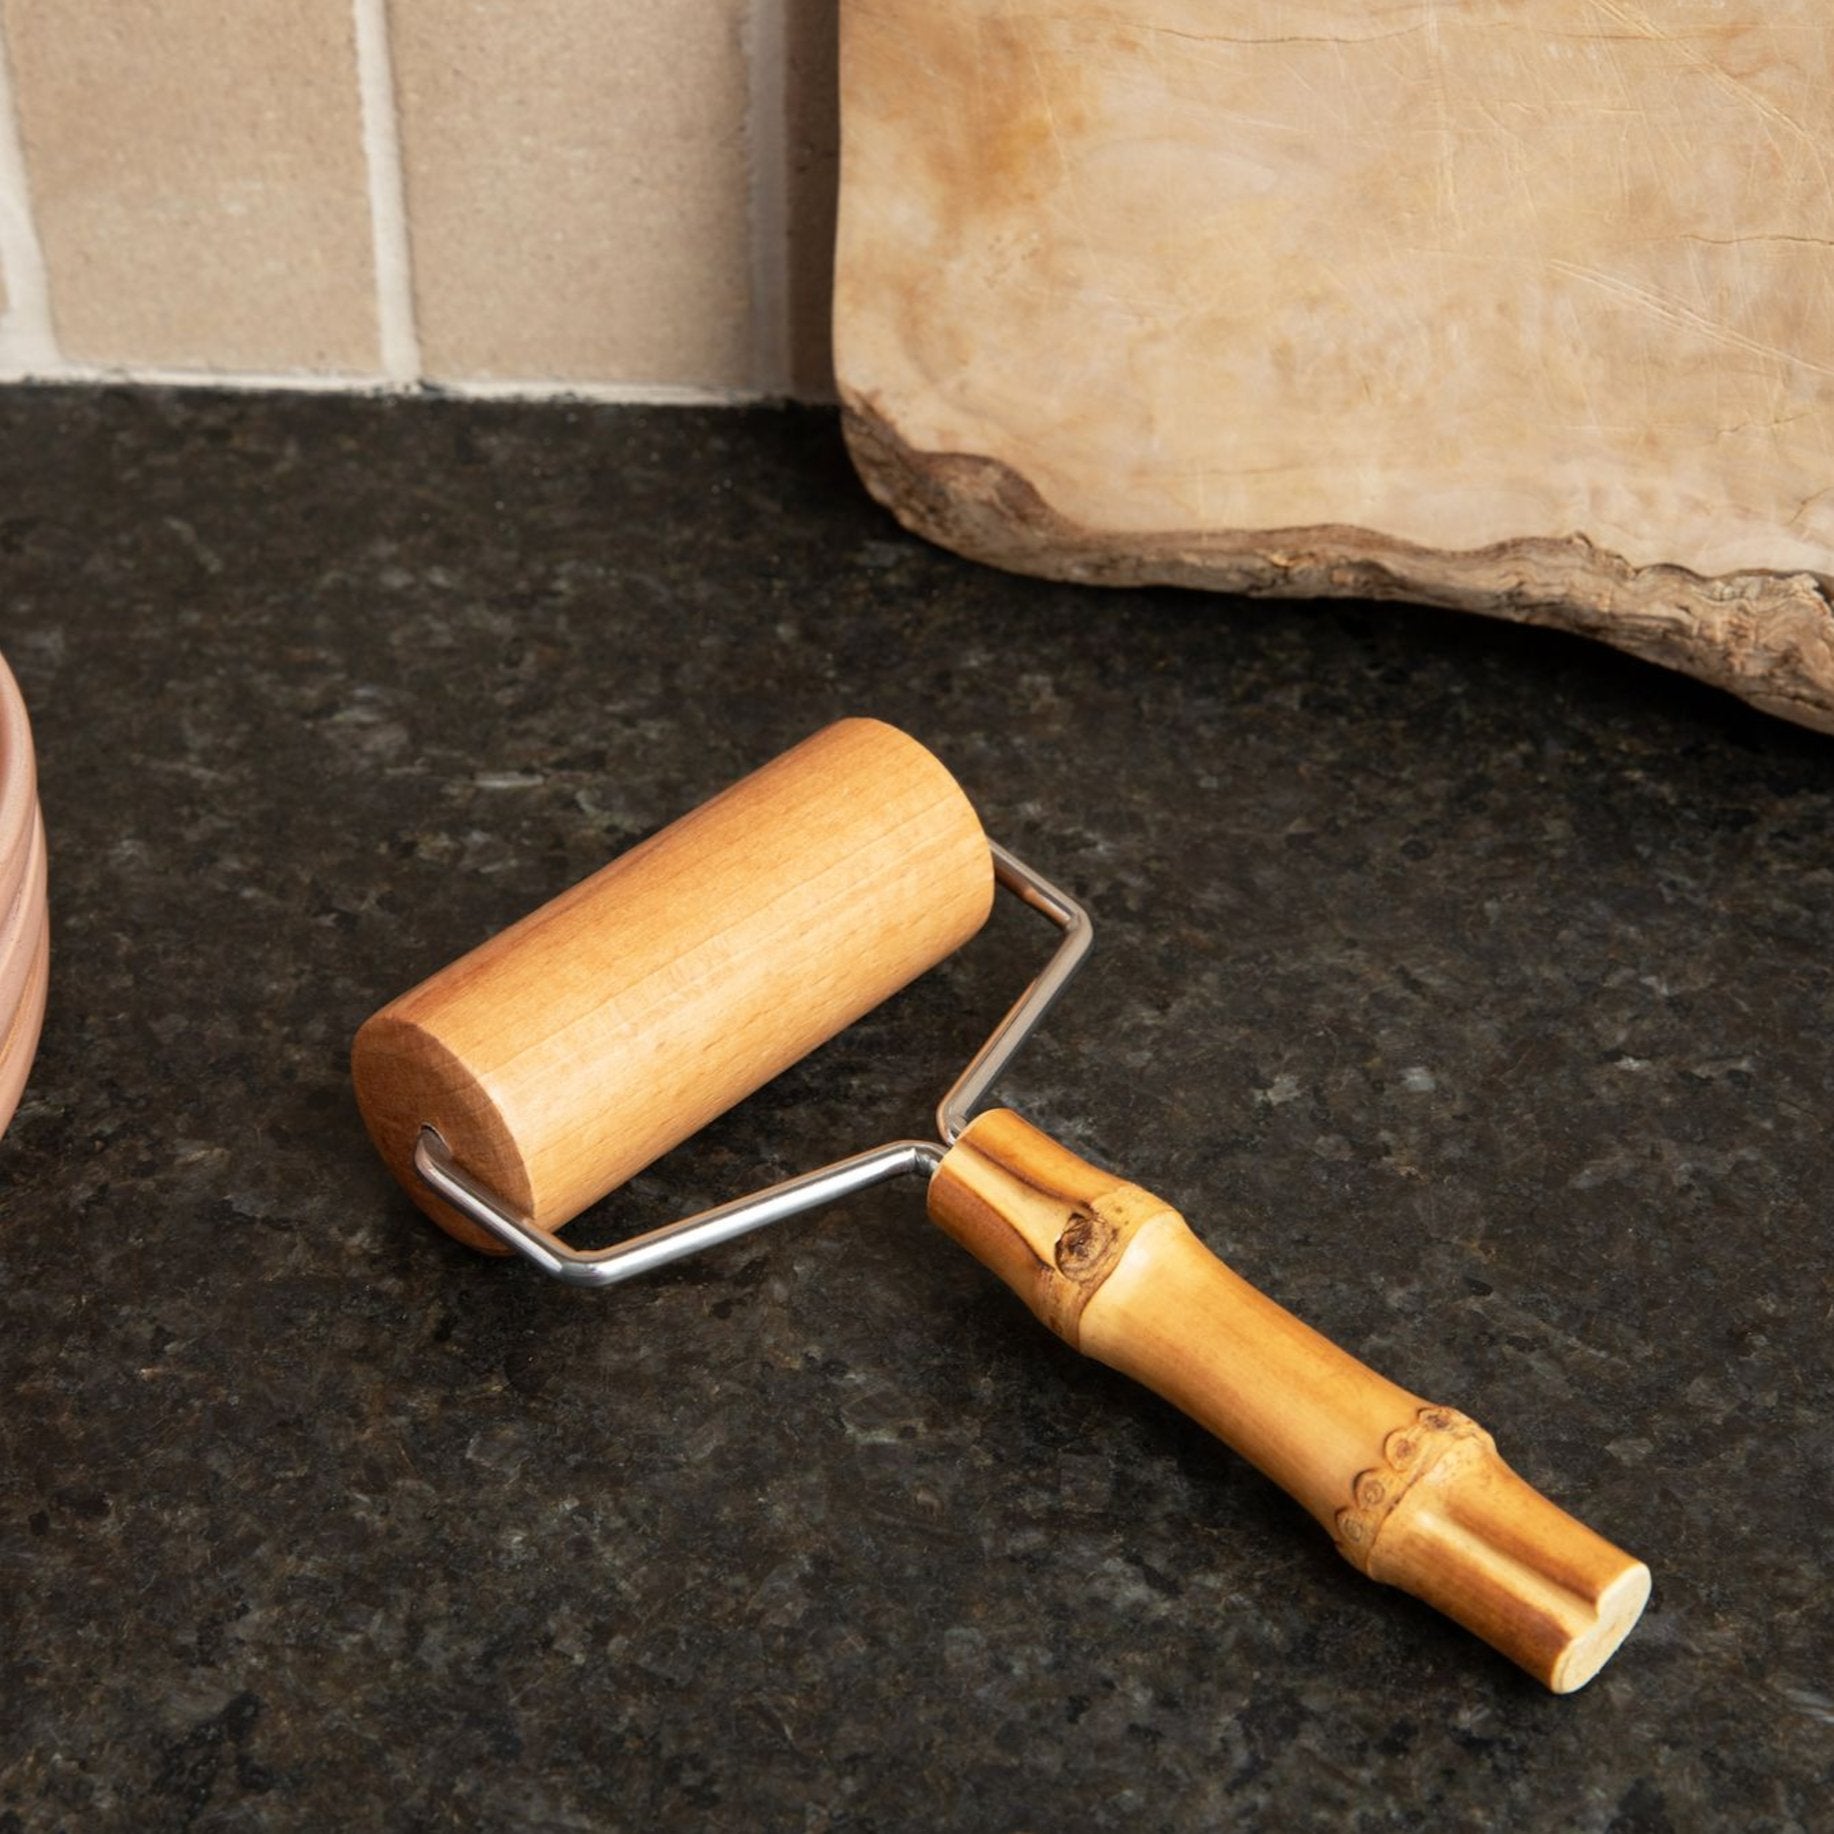 sustainable, zero waste, earth-friendly, plastic-free Bamboo Baking and Pizza Roller - Bamboo Switch